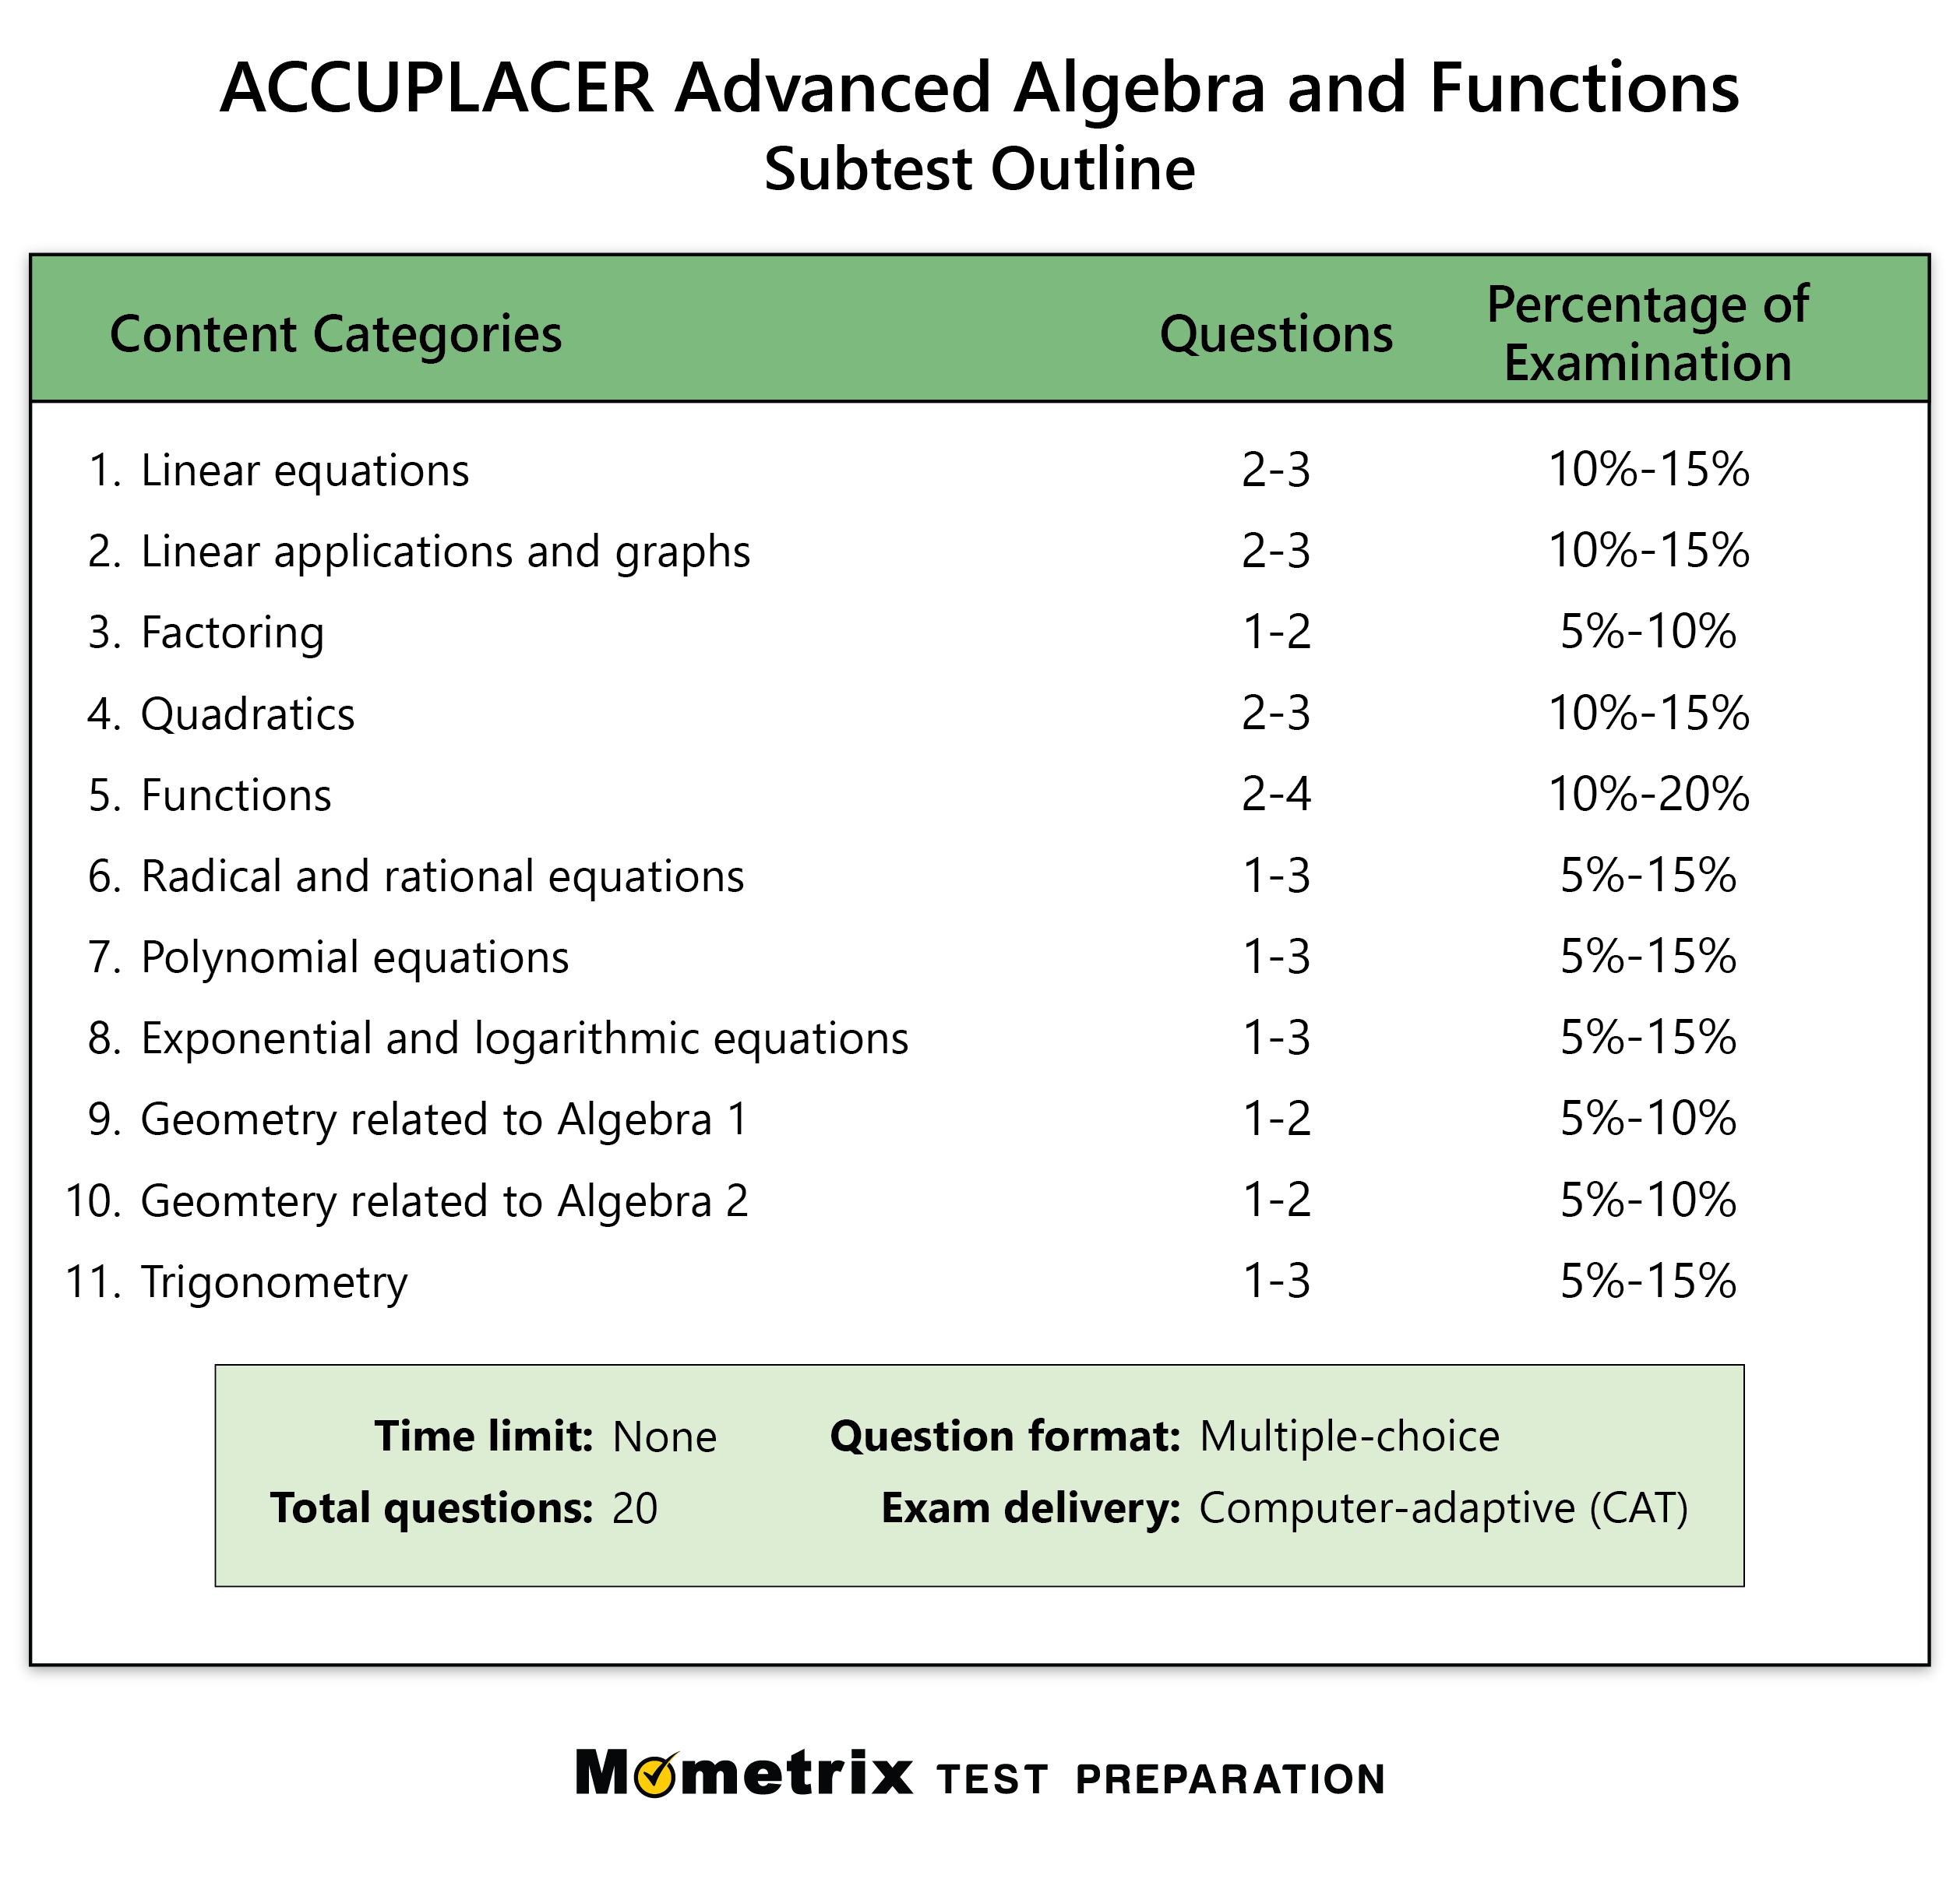 accuplacer-advanced-algebra-and-functions